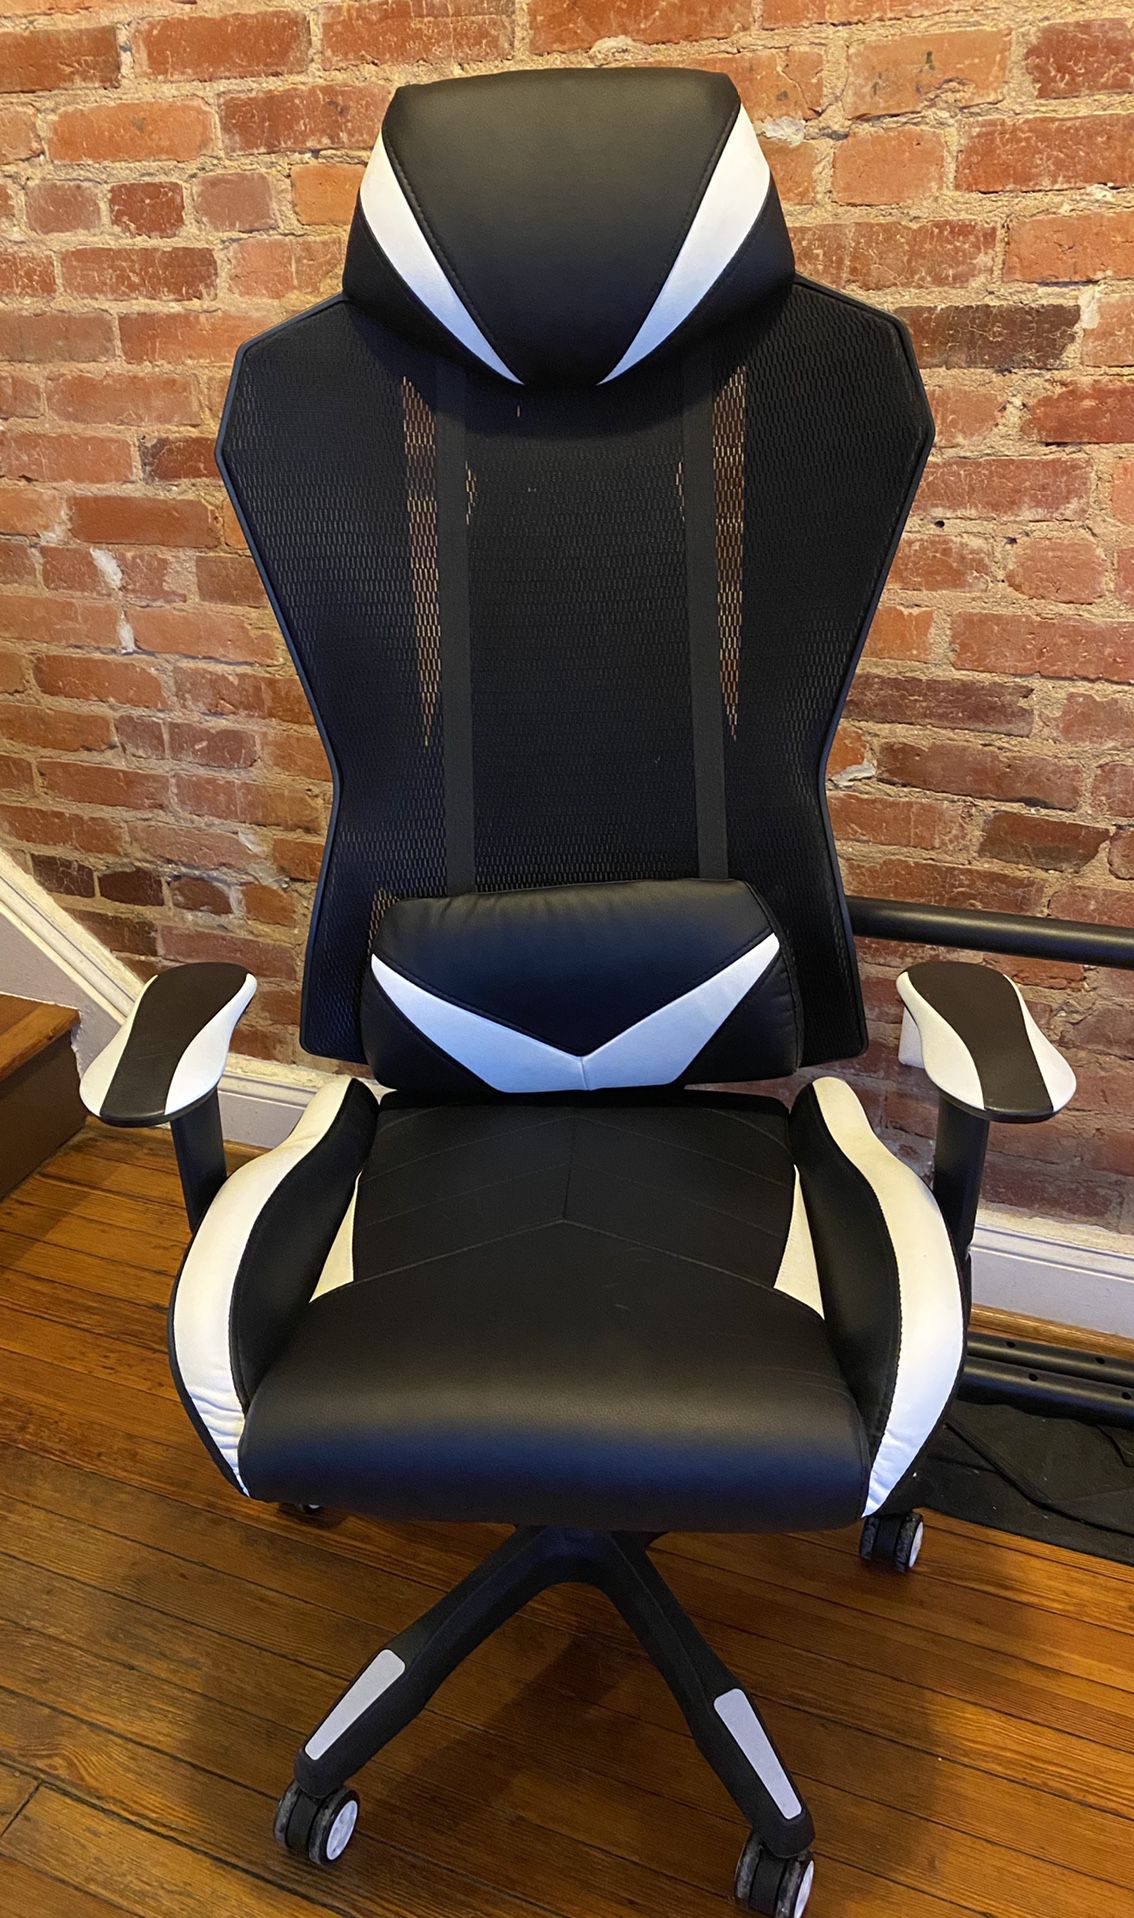 Almost Brand new Gaming Chair